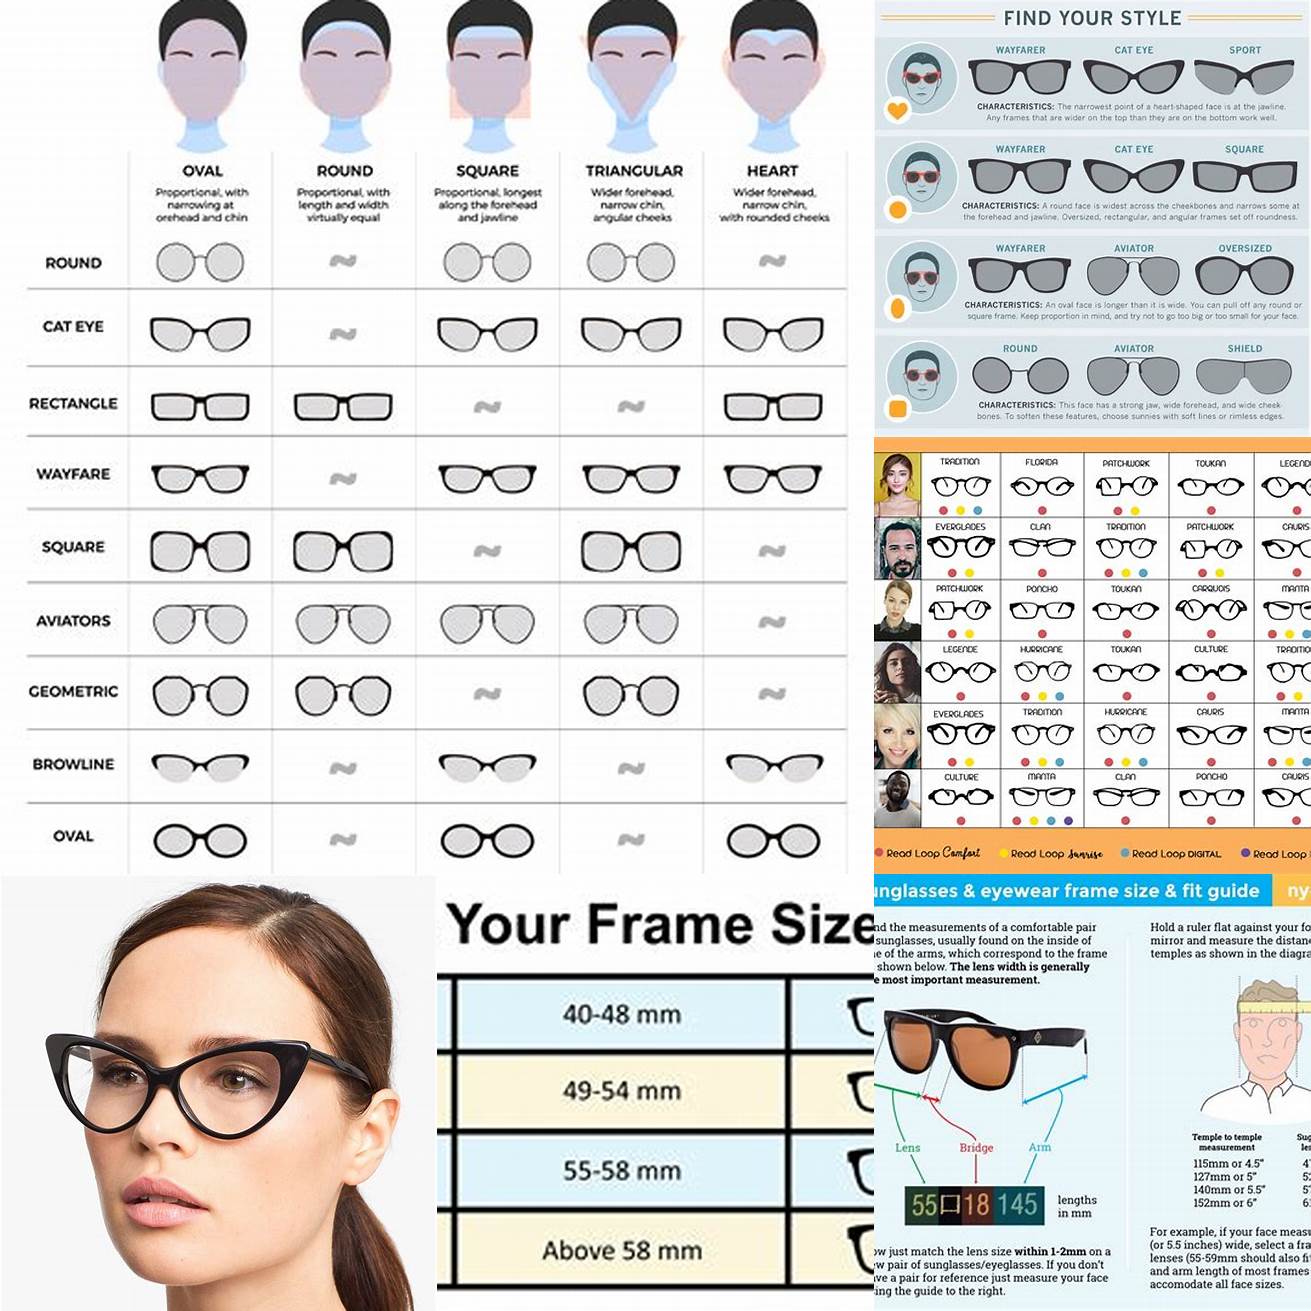 Q How do I choose the right size cat eye glasses